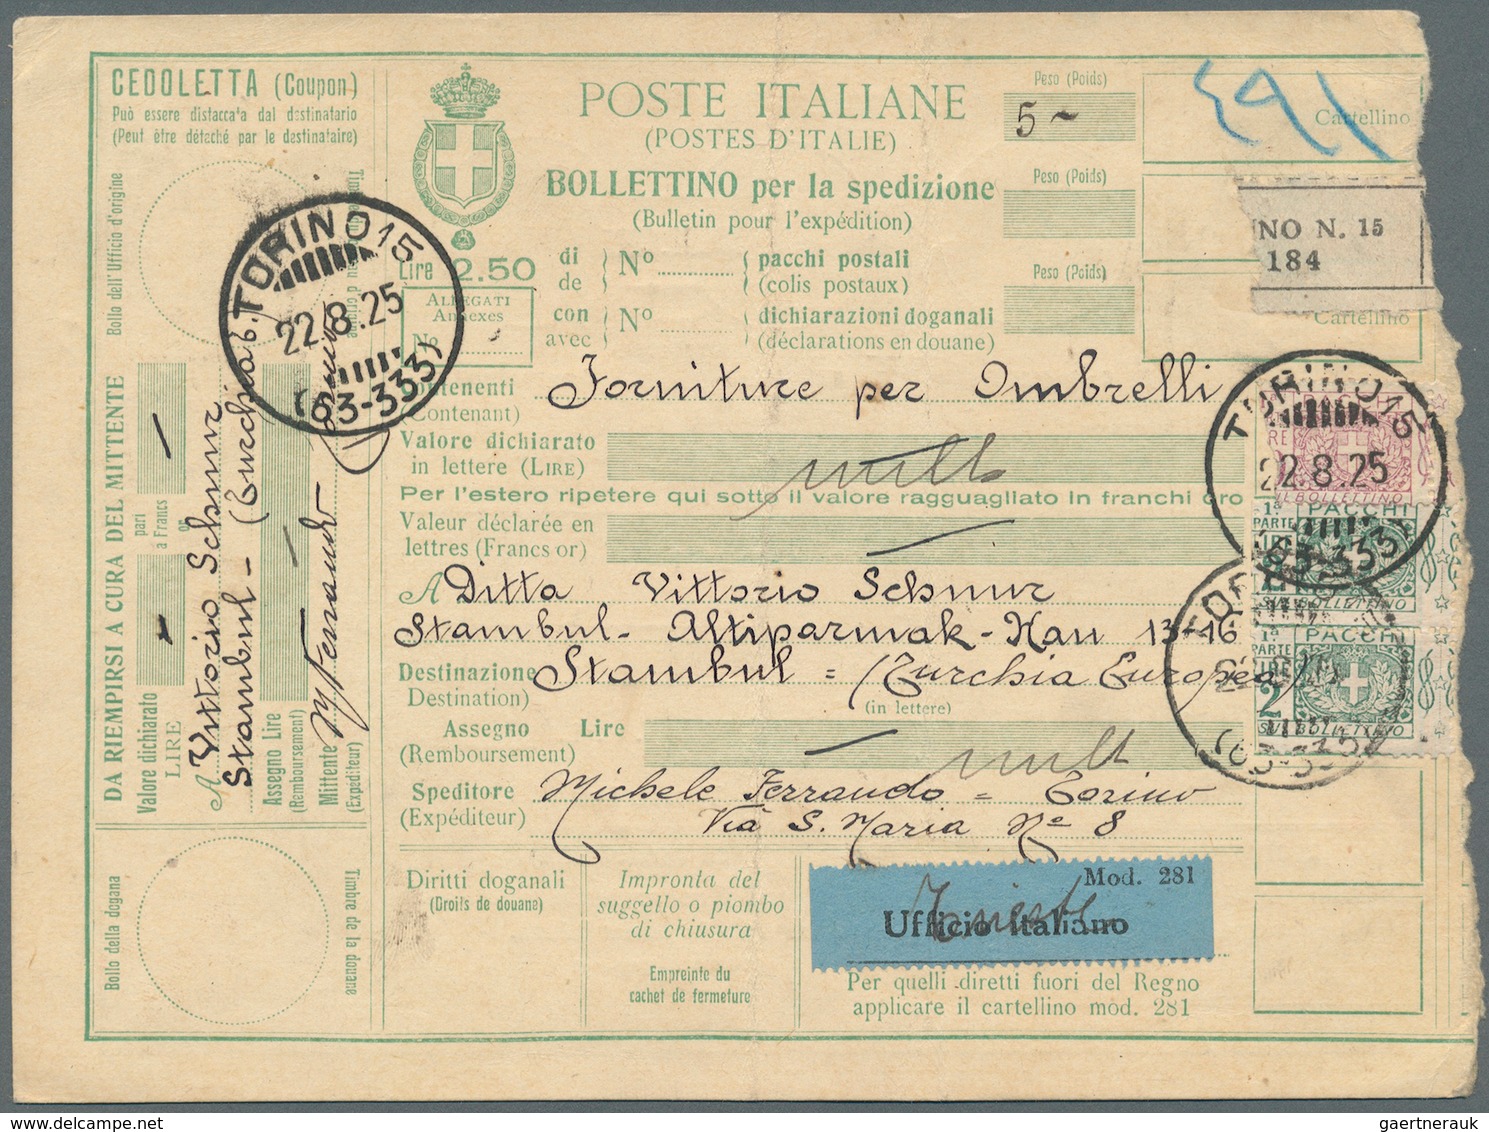 Italien - Ganzsachen: 1923/1926 six parcel cards from Italy to Istanbul / Constantinople. Turkish st